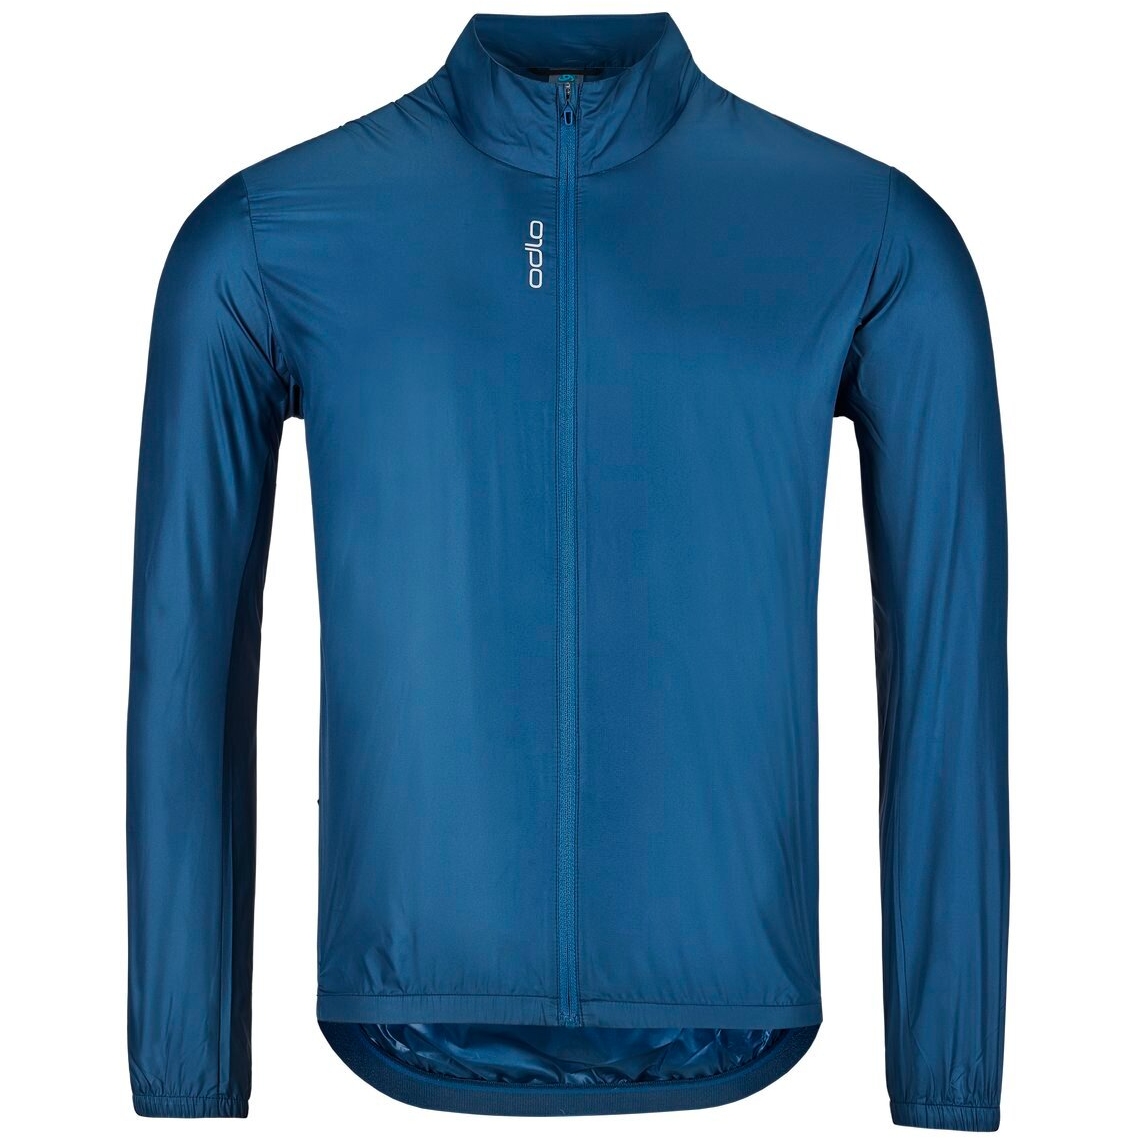 Picture of Odlo Essentials Cycling Jacket Men - blue wing teal